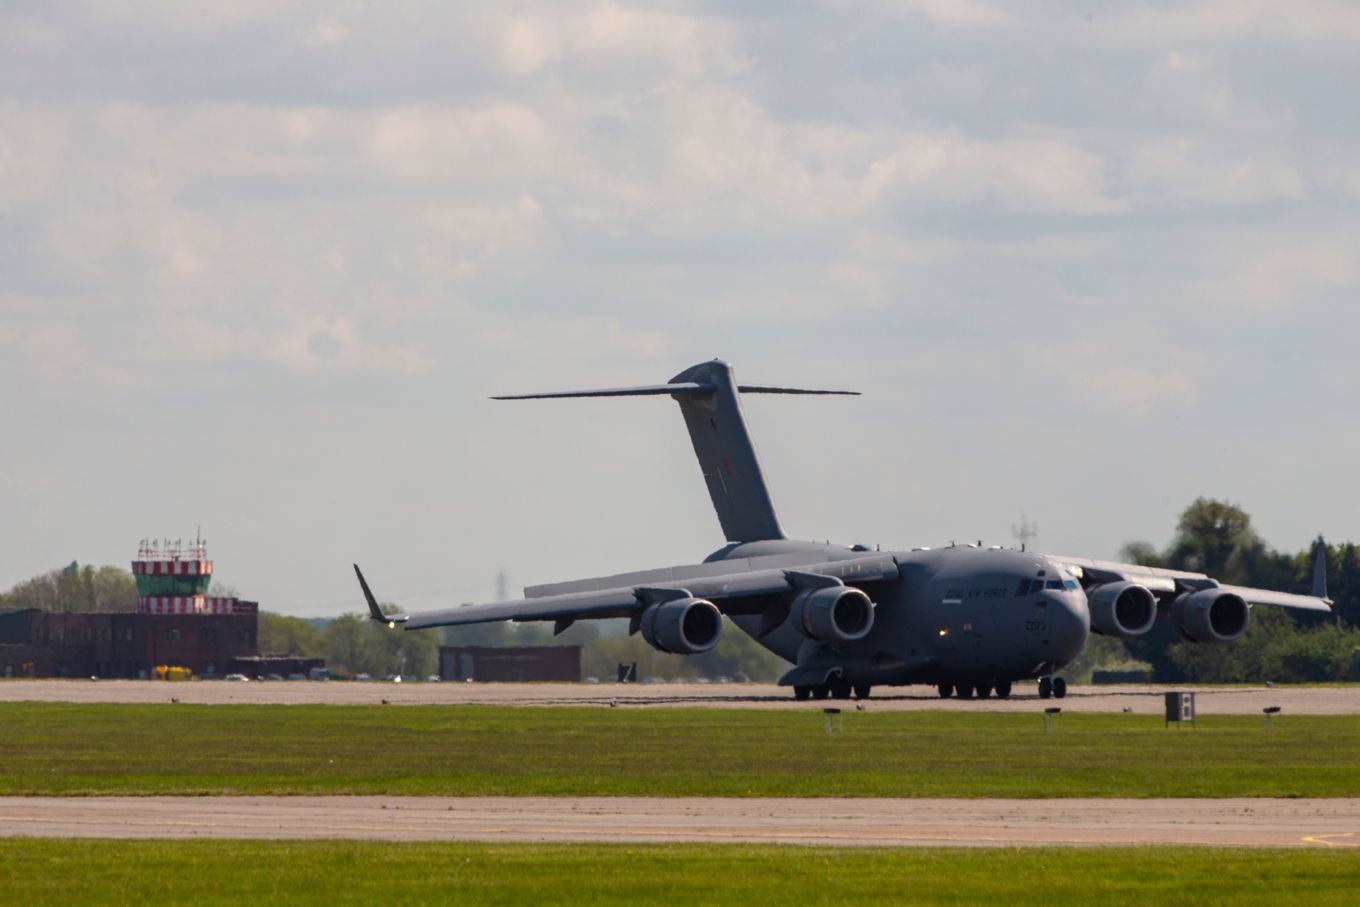 RAF C17 Globemaster touches down at RAF Wittering